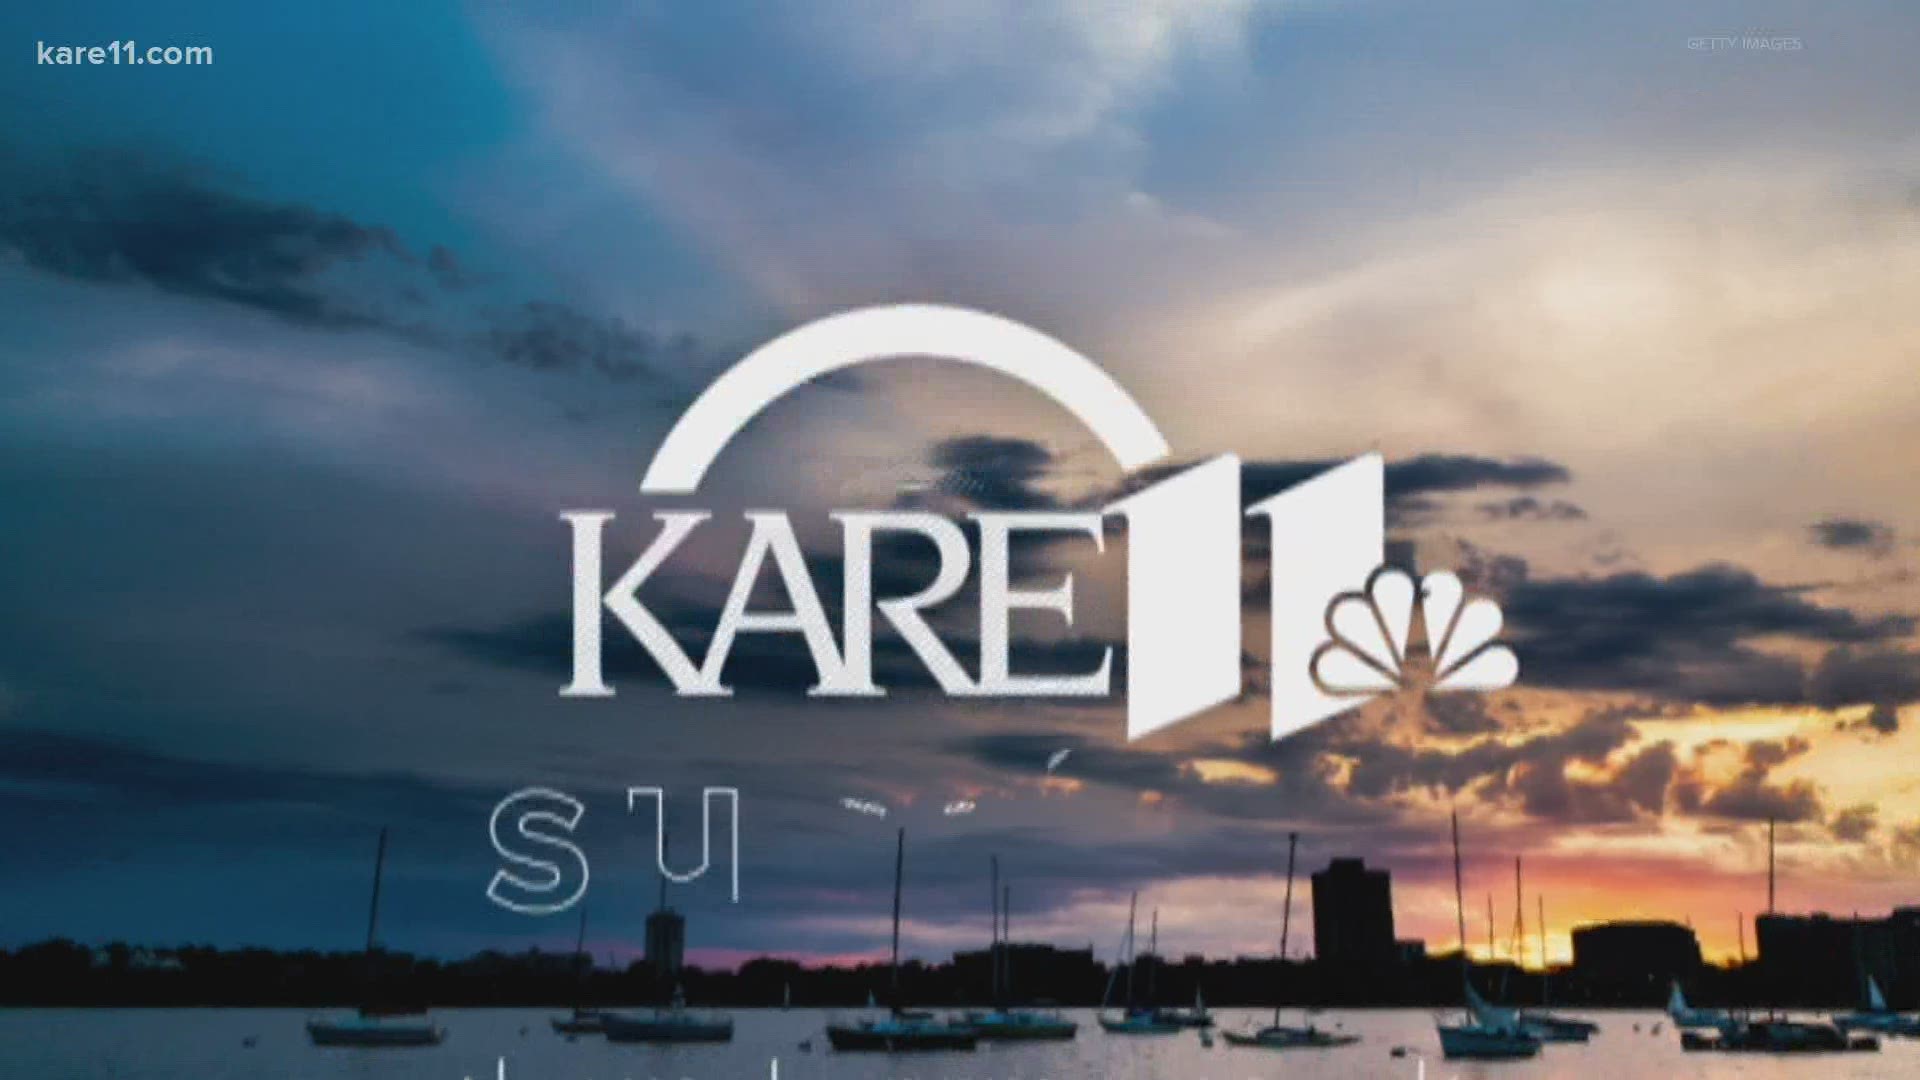 The early headlines from KARE 11 Sunrise